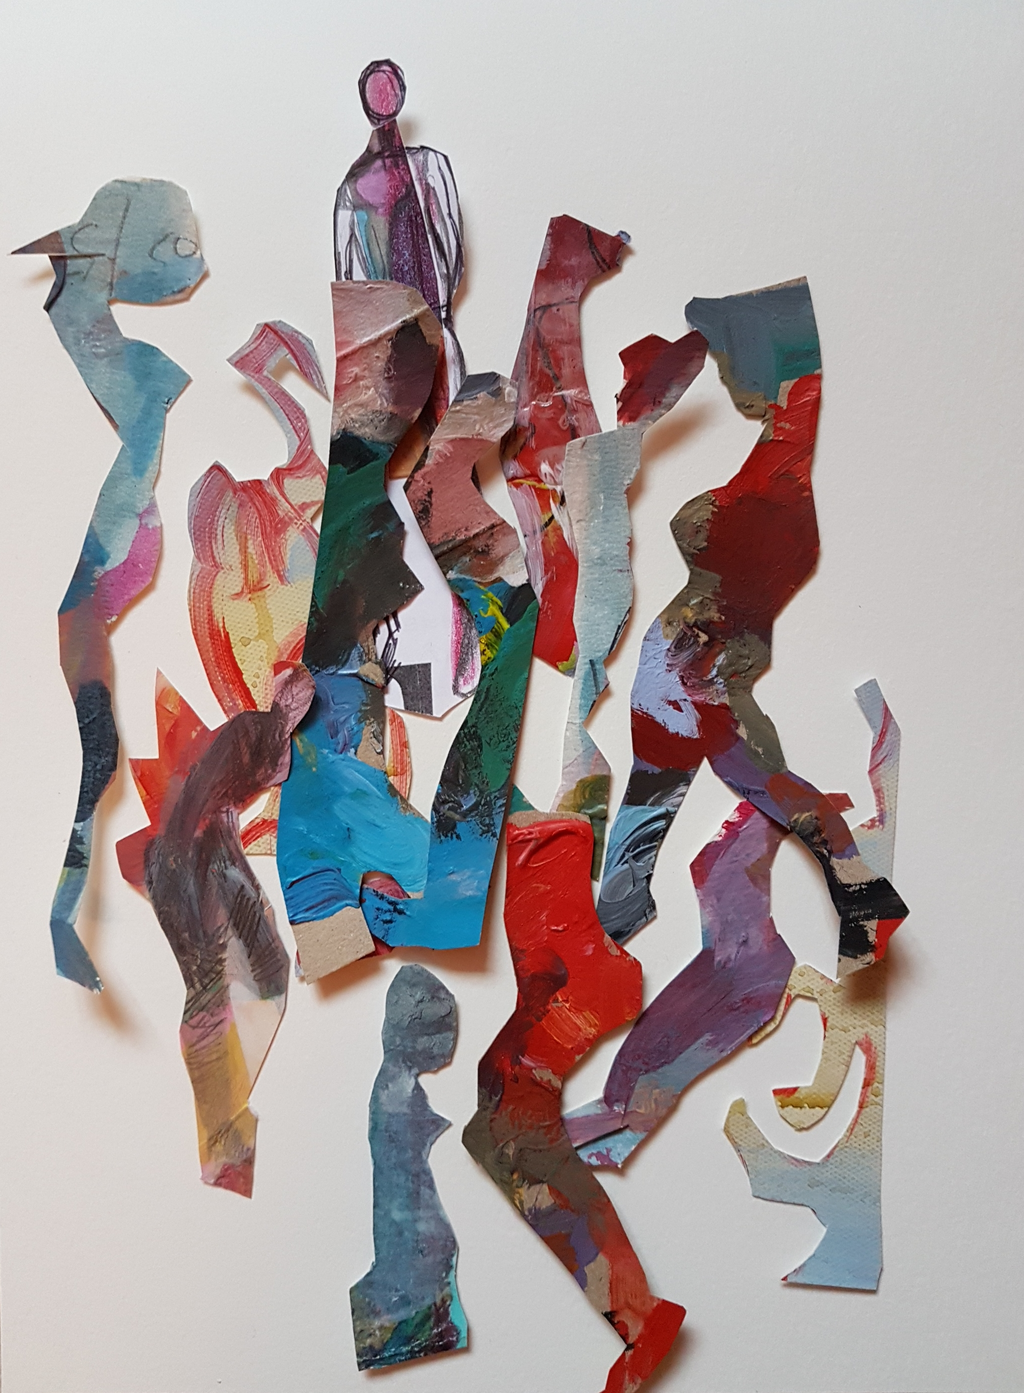 IVILINA KOUNEVA. Braving our way through - painted cut-outs on paper